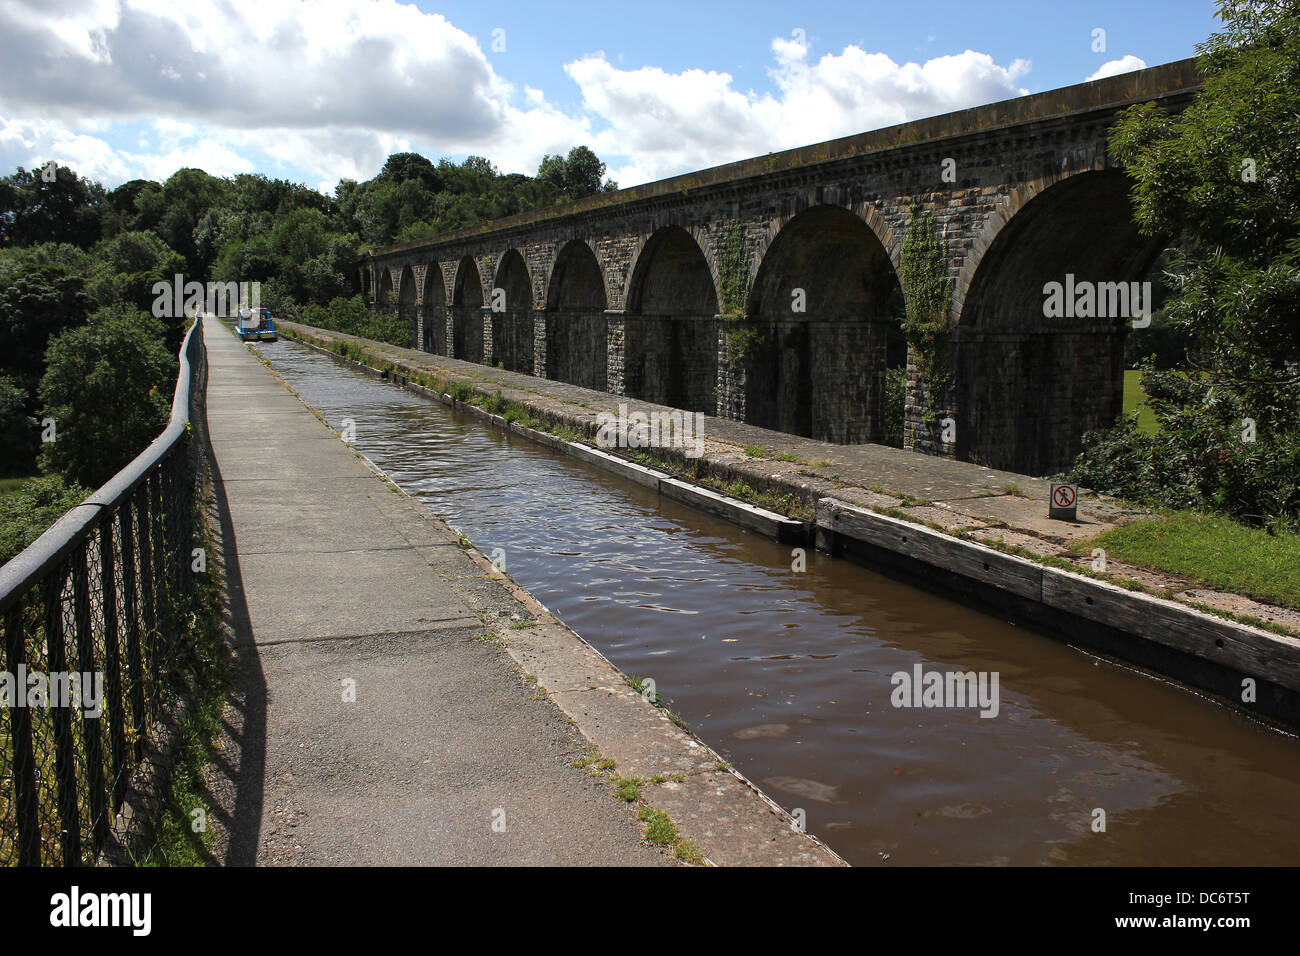 Blue boat on Chirk aqueduct Stock Photo